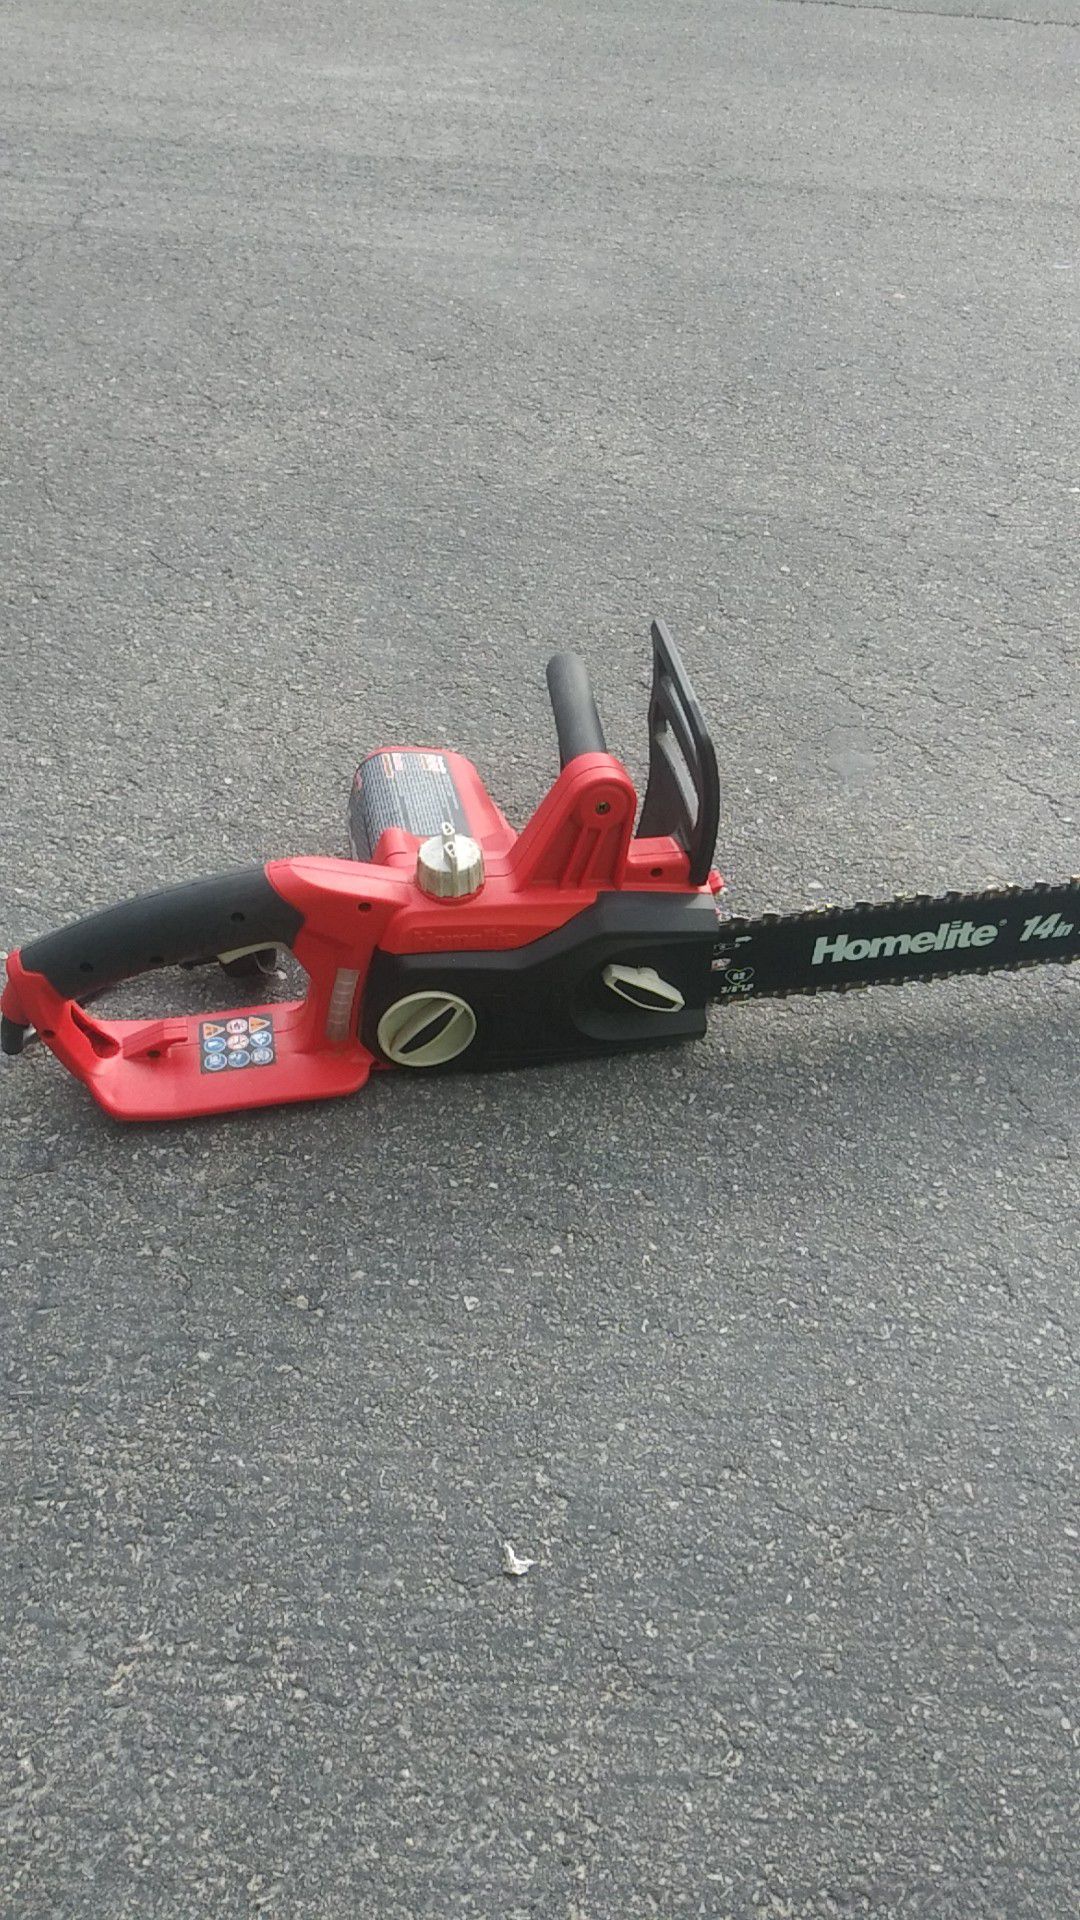 Electric Homelite chainsaw